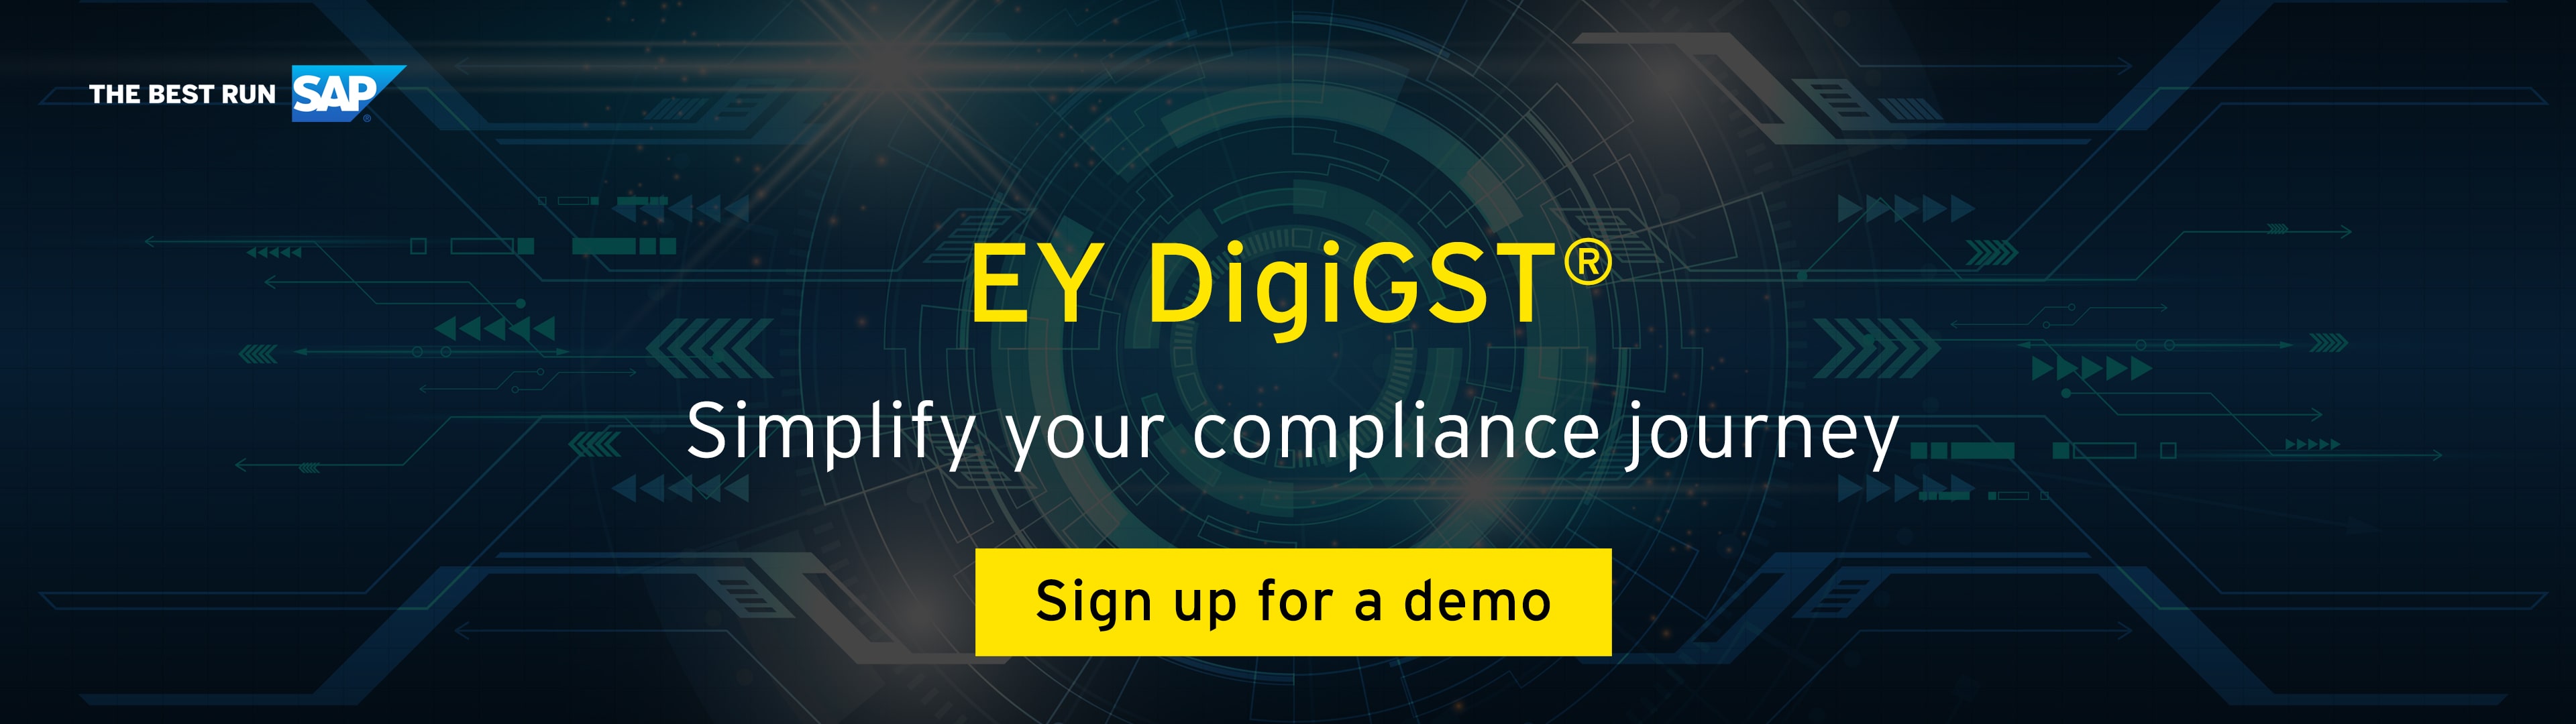 Siplify your GST copliance journey with DigiGST®